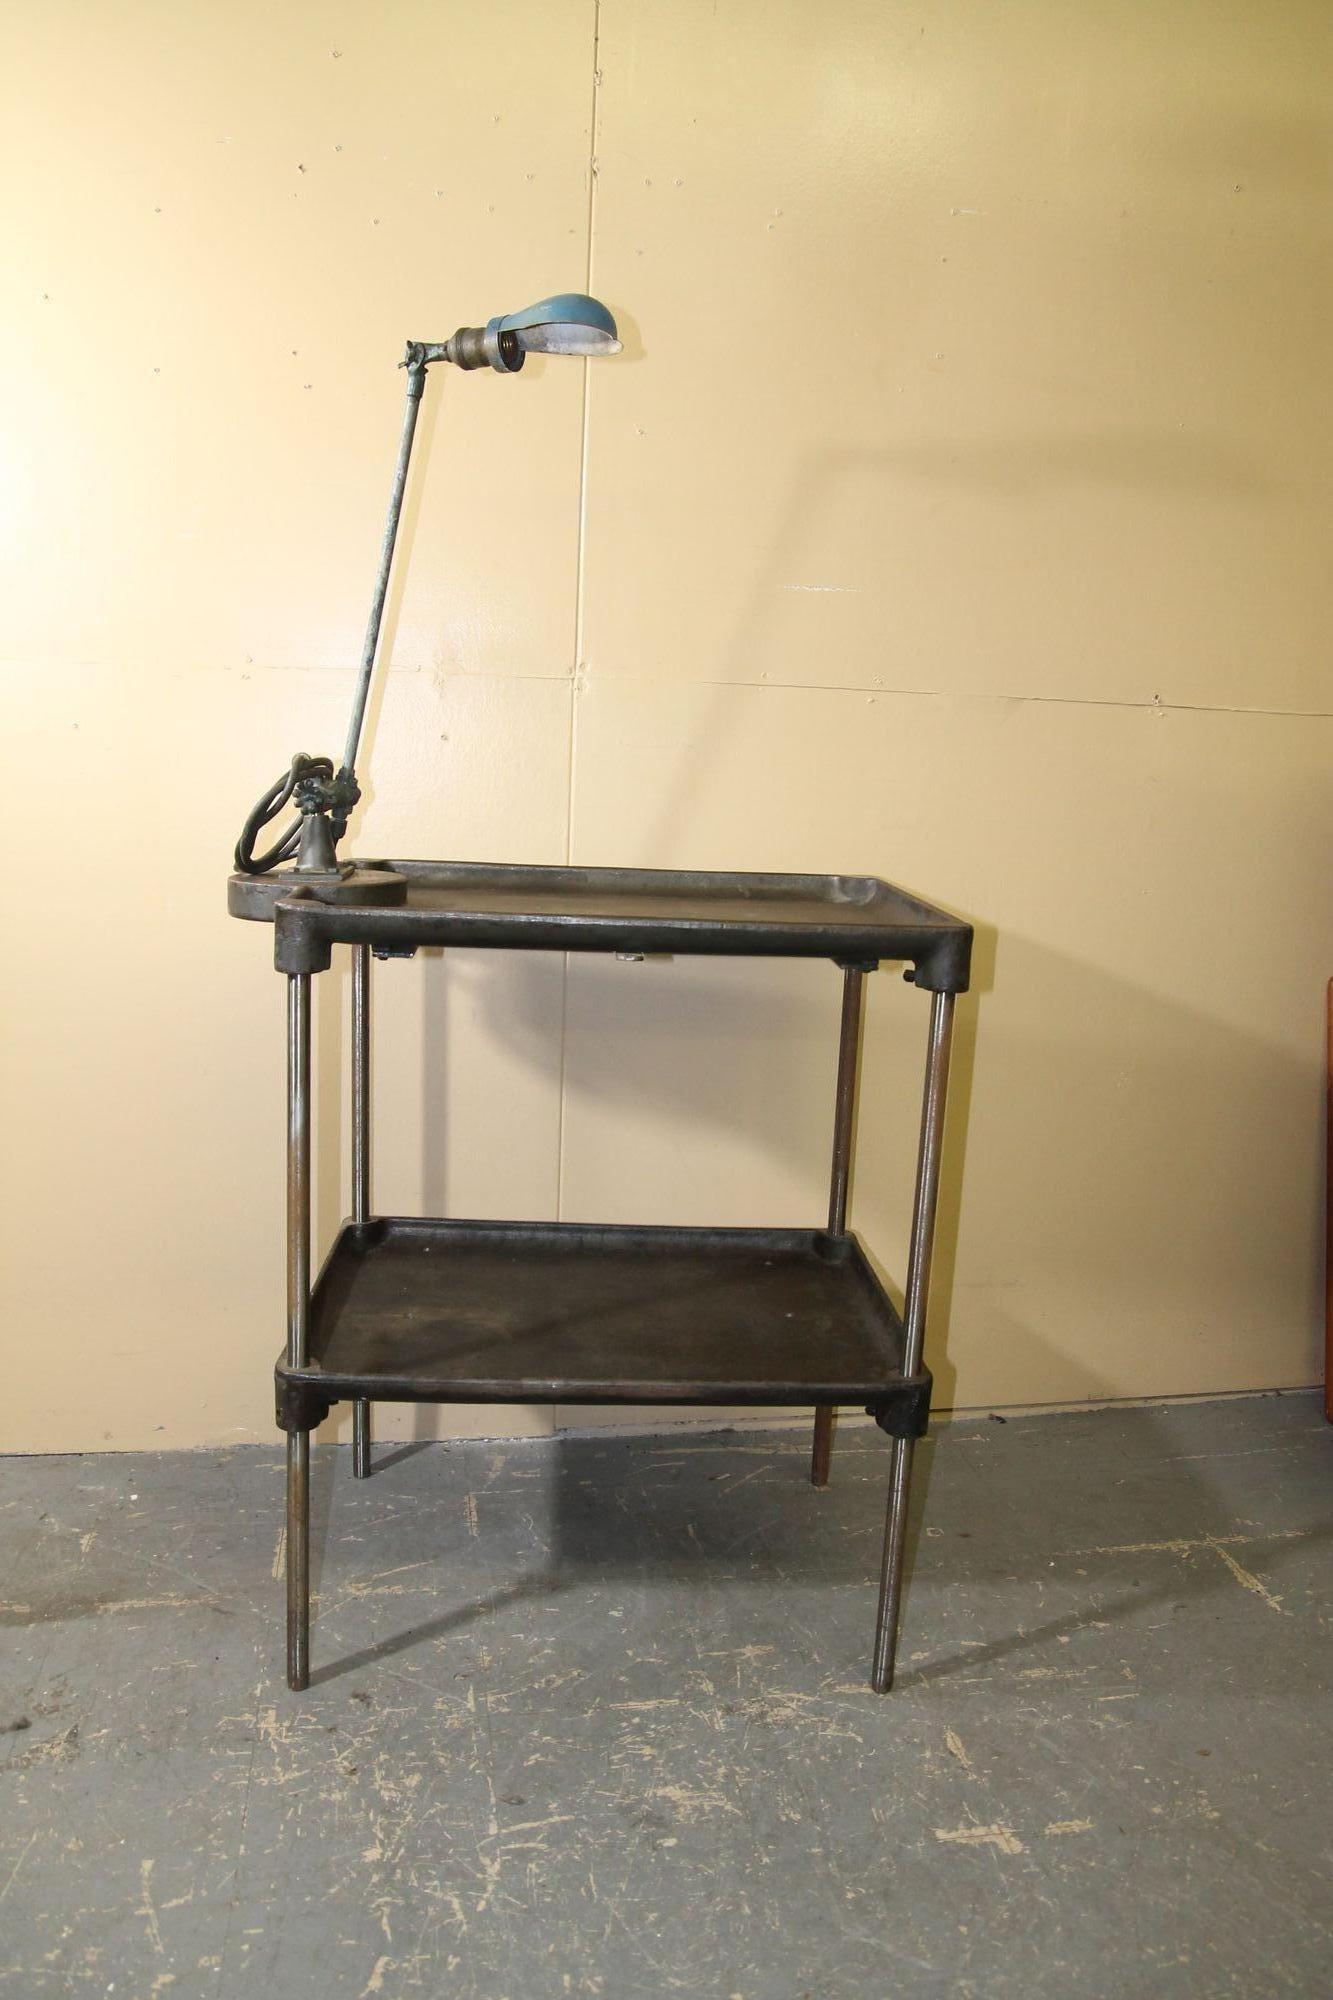 Im pleased to offer this great metal work table with a OC White work light attached to it. These 100 year old plus tables came from a screw factory in Ohio. This will make a nice side table or entry way table. I have a second one available that is